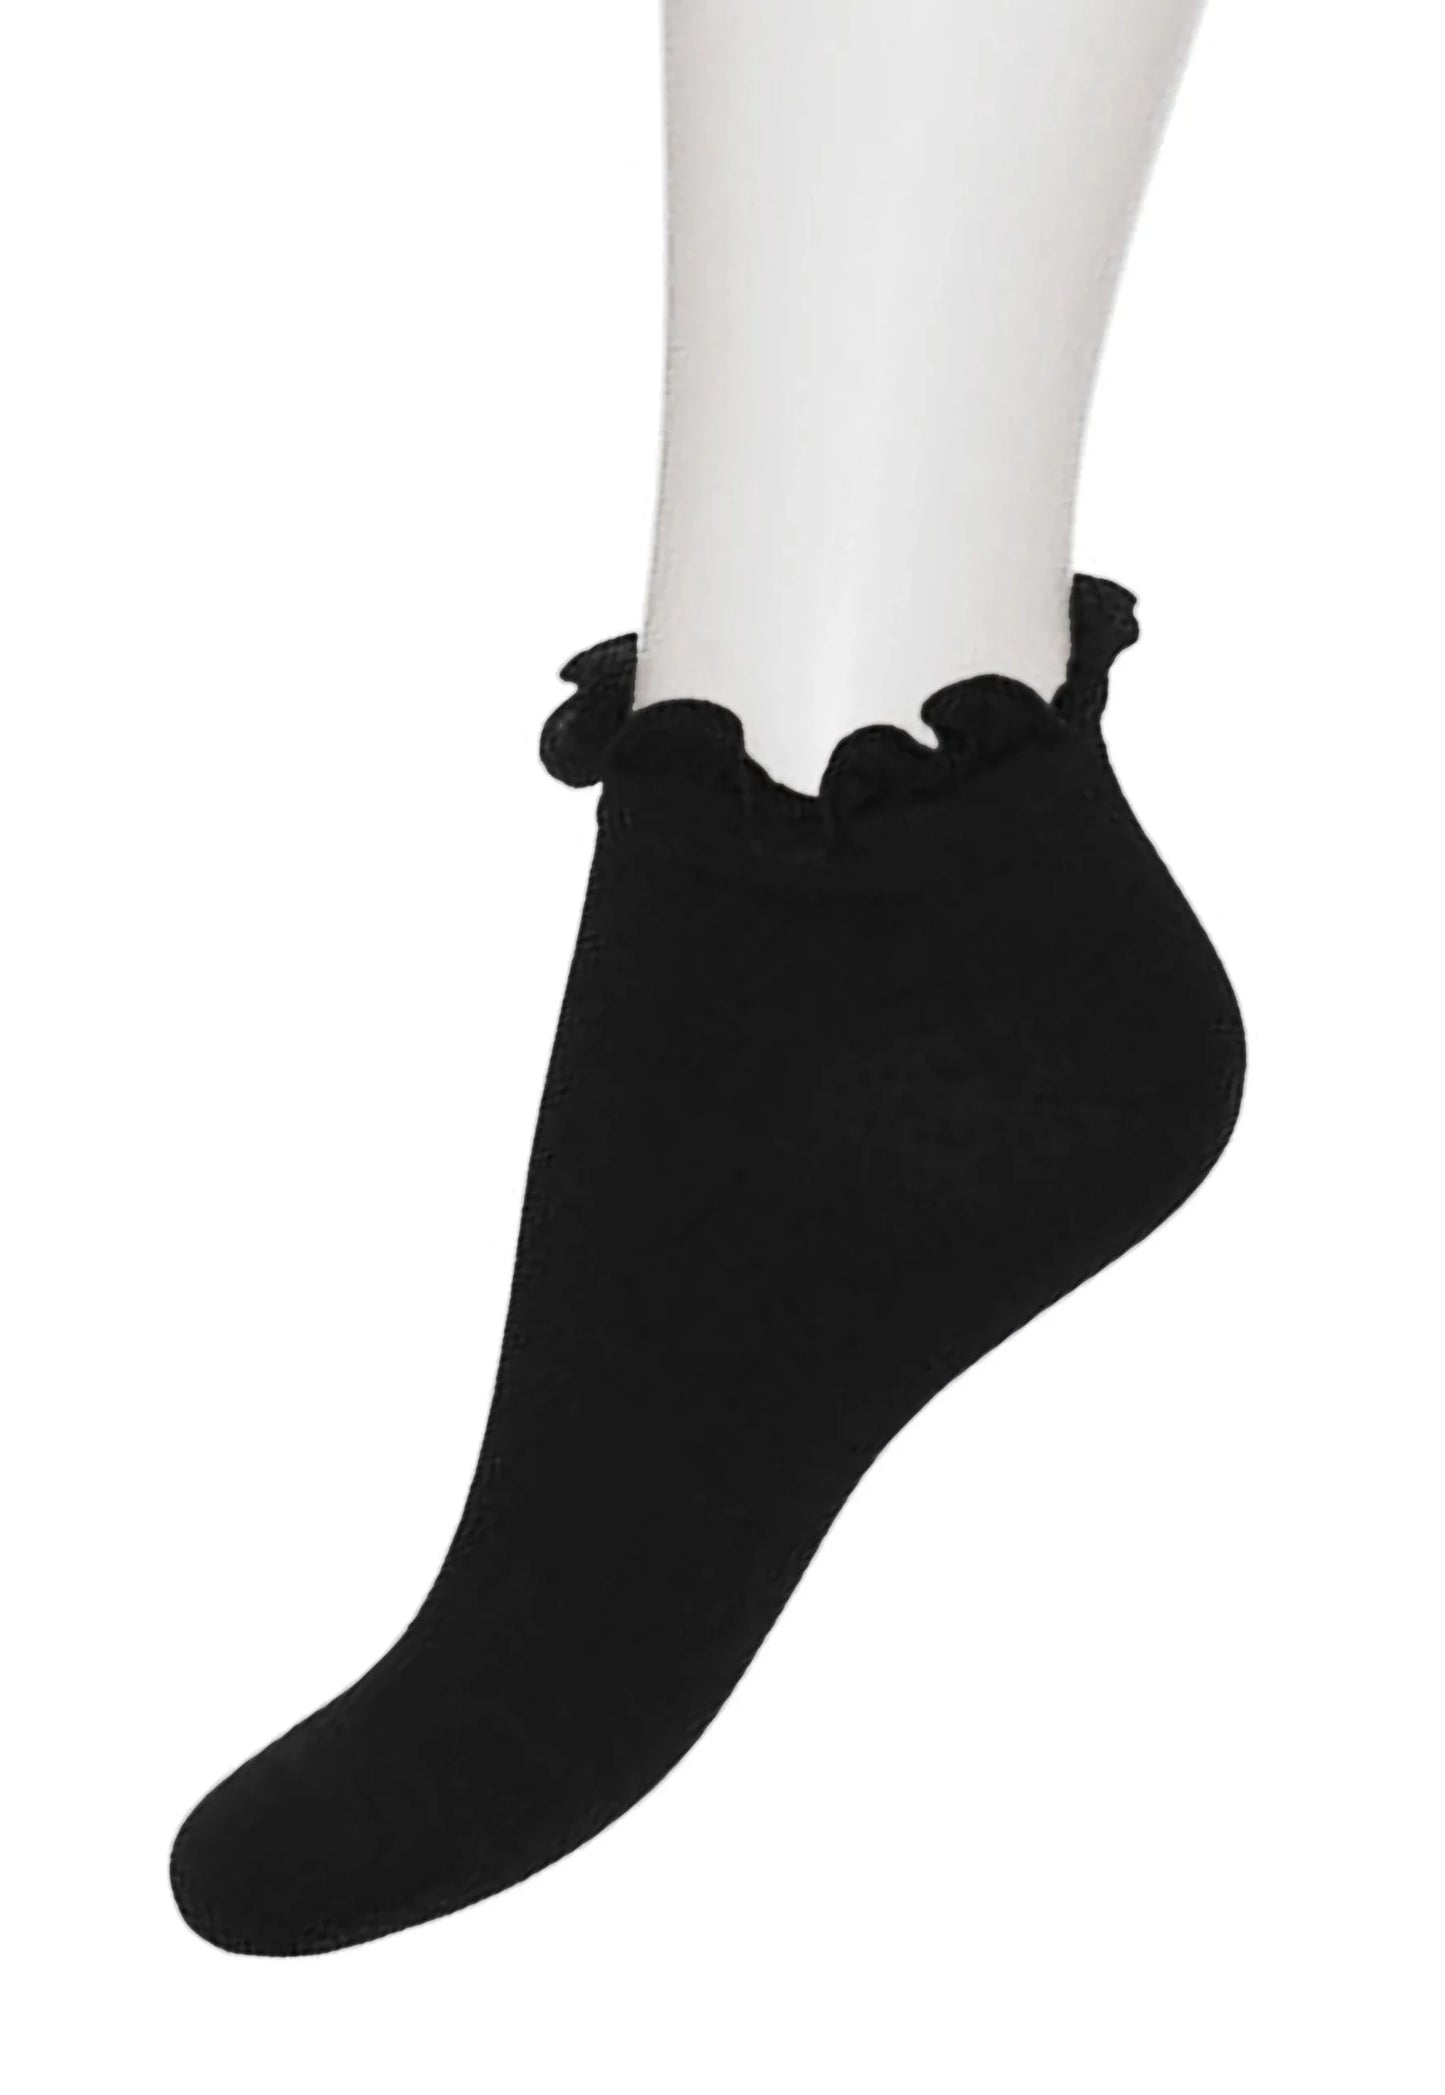 Bonnie Doon BN34.10.19 Lettuce Sock - black low rise cotton ankle socks with frill cuff